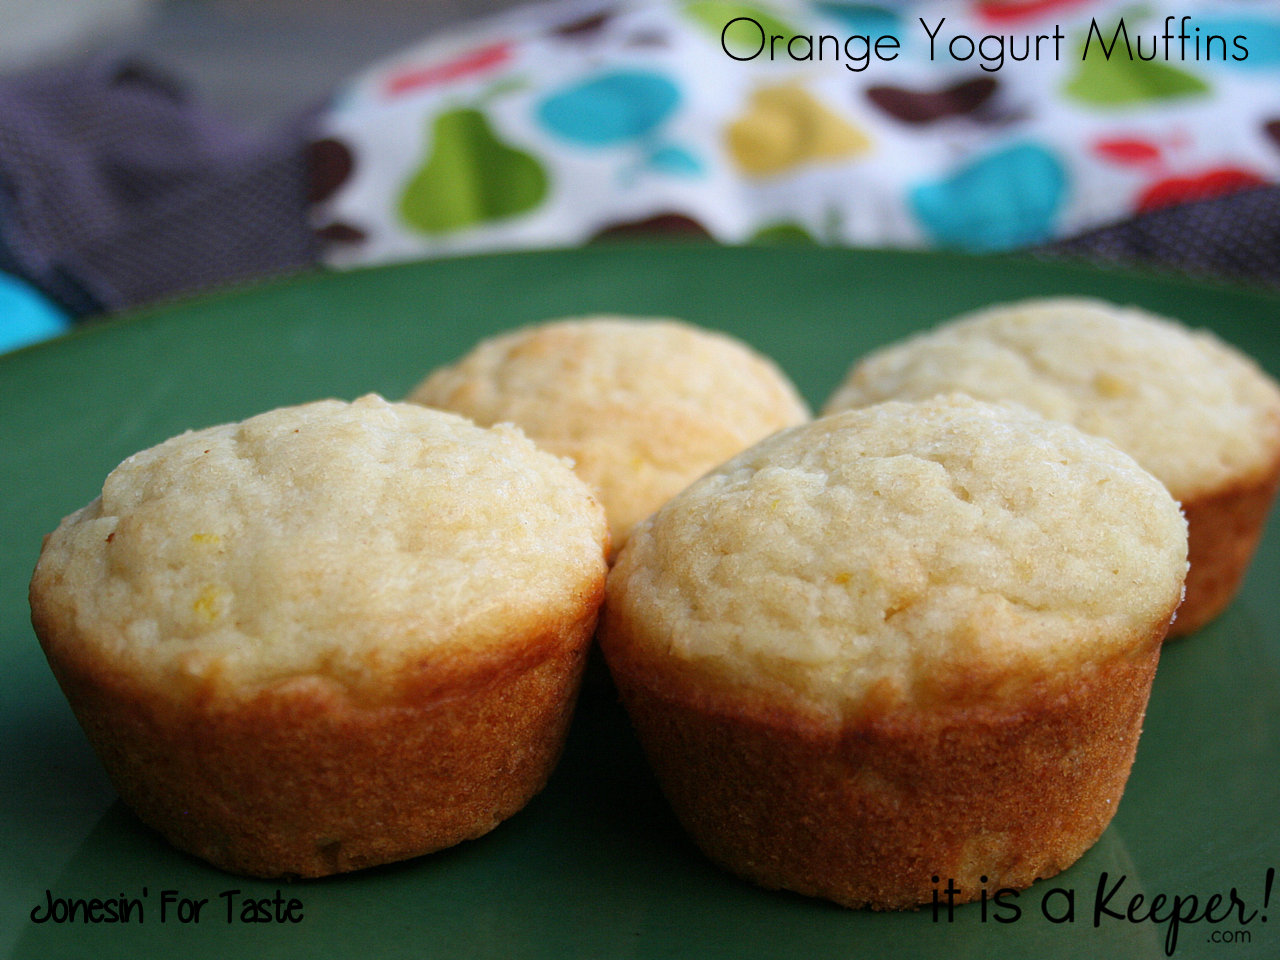 Tangy Orange Yogurt Muffins are an easy breakfast recipe that's ready in 30 minutes.